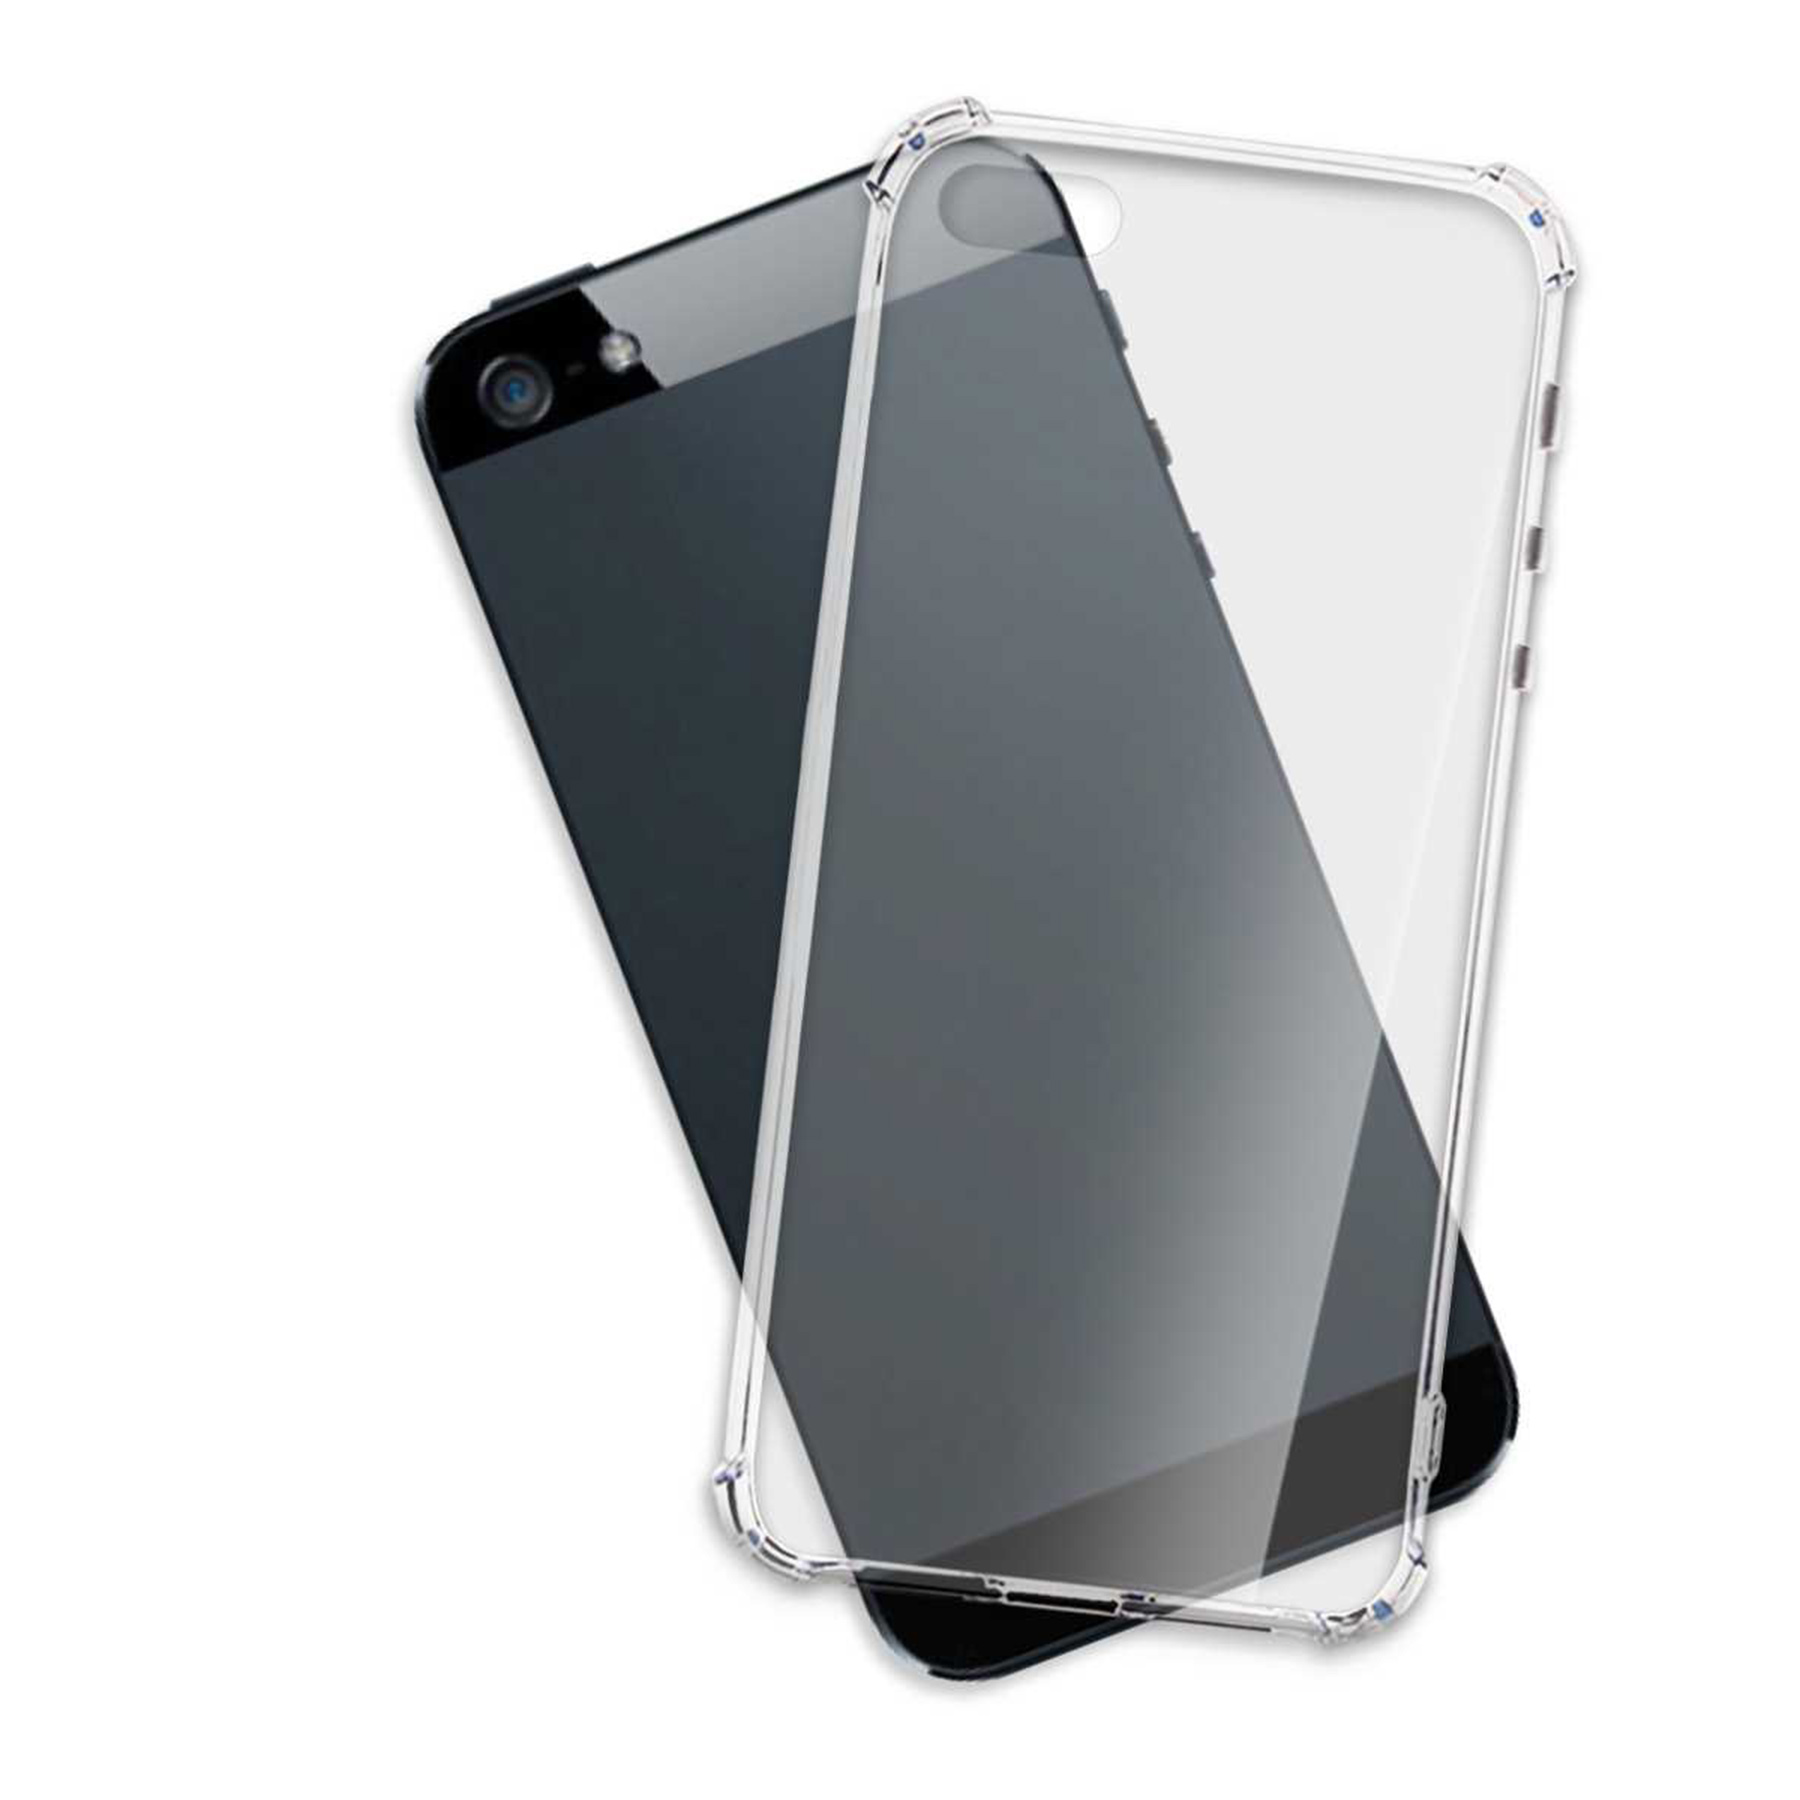 Case, Transparent iPhone 5s, Armor MTB Clear MORE 5, Apple, iPhone ENERGY iPhone SE, Backcover,